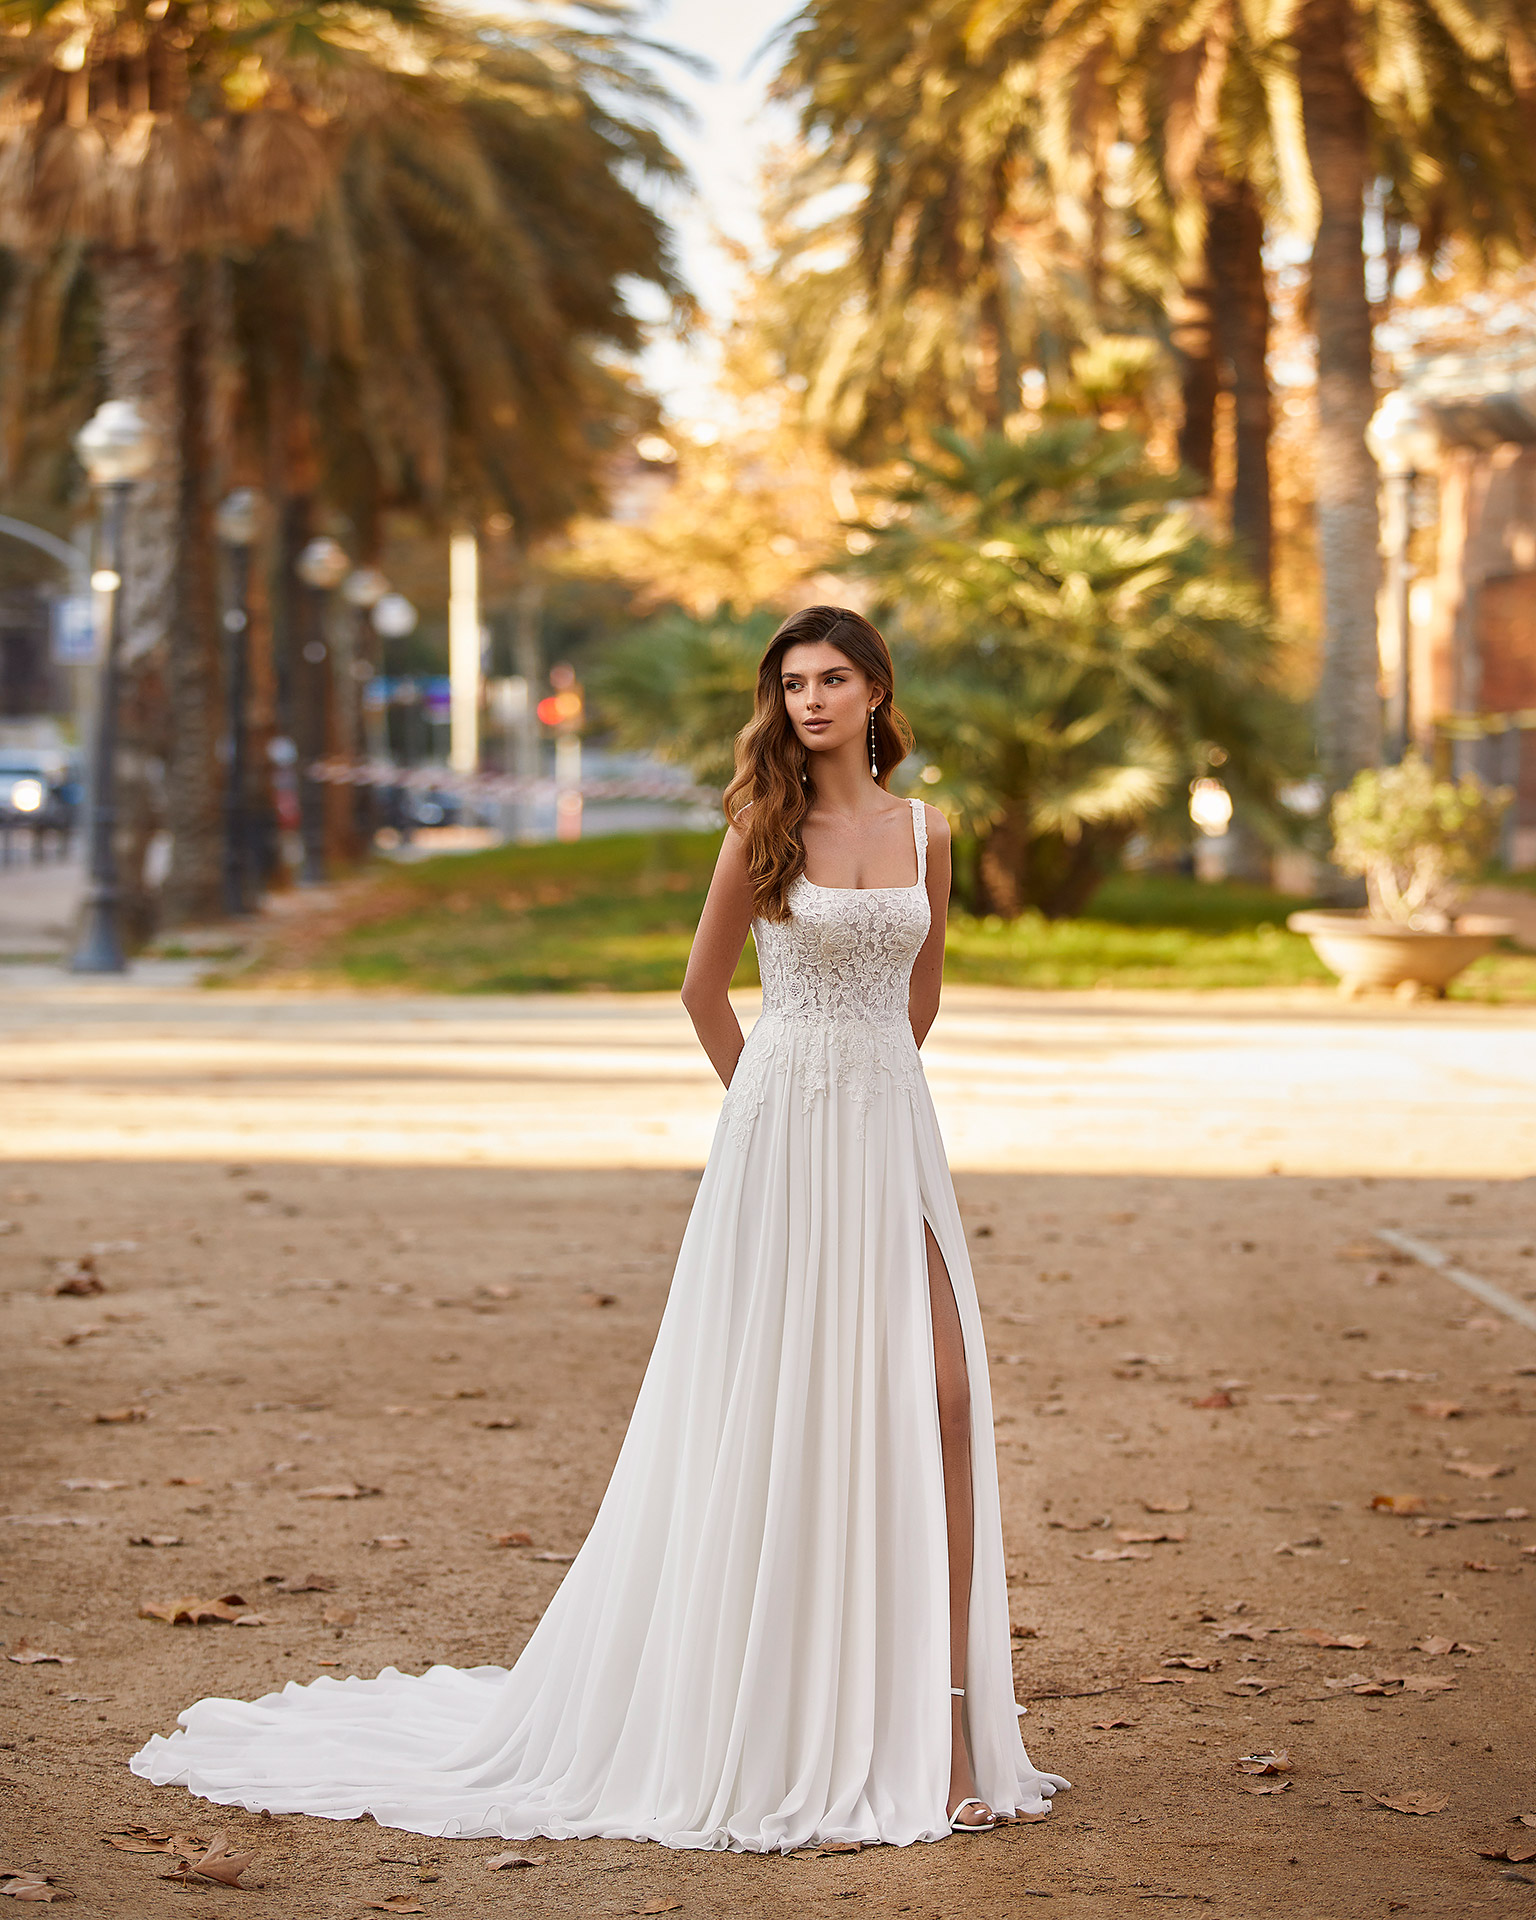 Flowing ballgown-style wedding dress made of Georgette, with a sheath-style skirt with a front slit; with a square neckline and a plunging lace back. Delicate Luna Novias design made of Georgette combined with beadwork lace. LUNA_NOVIAS.